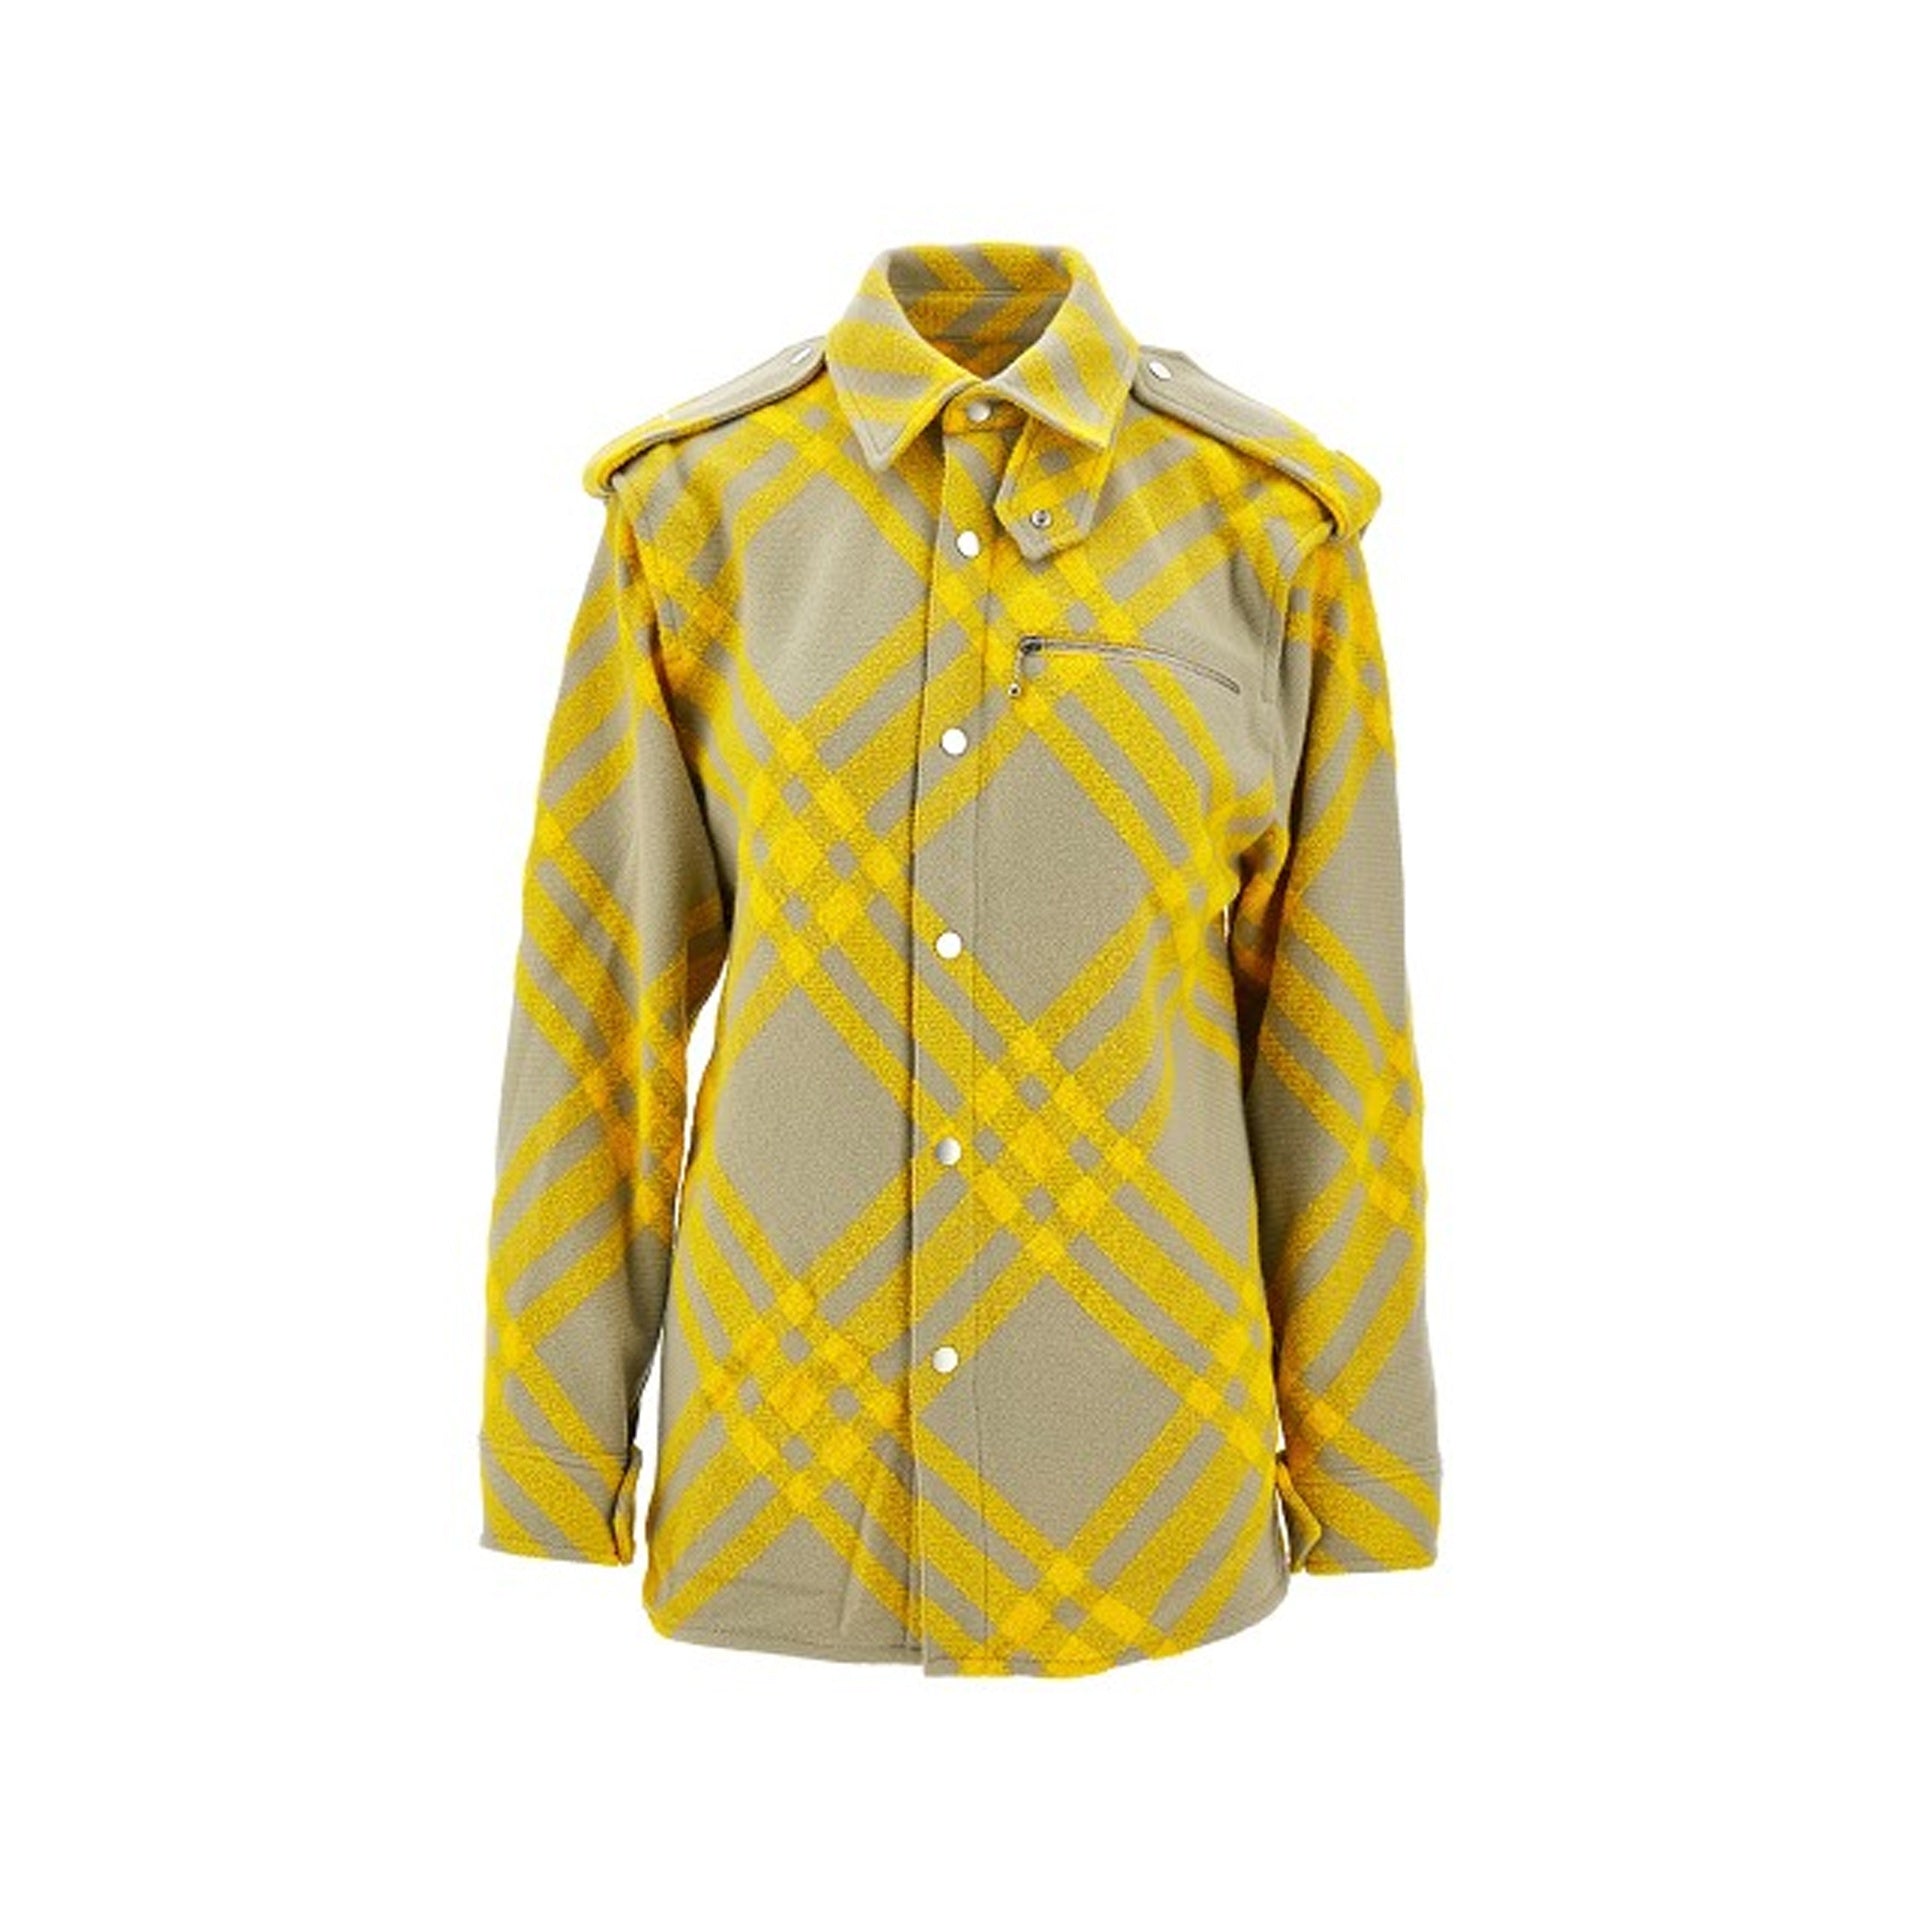 BURBERRY-OUTLET-SALE-Burberry-Wool-Checked-Jacket-Jacken-Mantel-YELLOW-36-ARCHIVE-COLLECTION.jpg